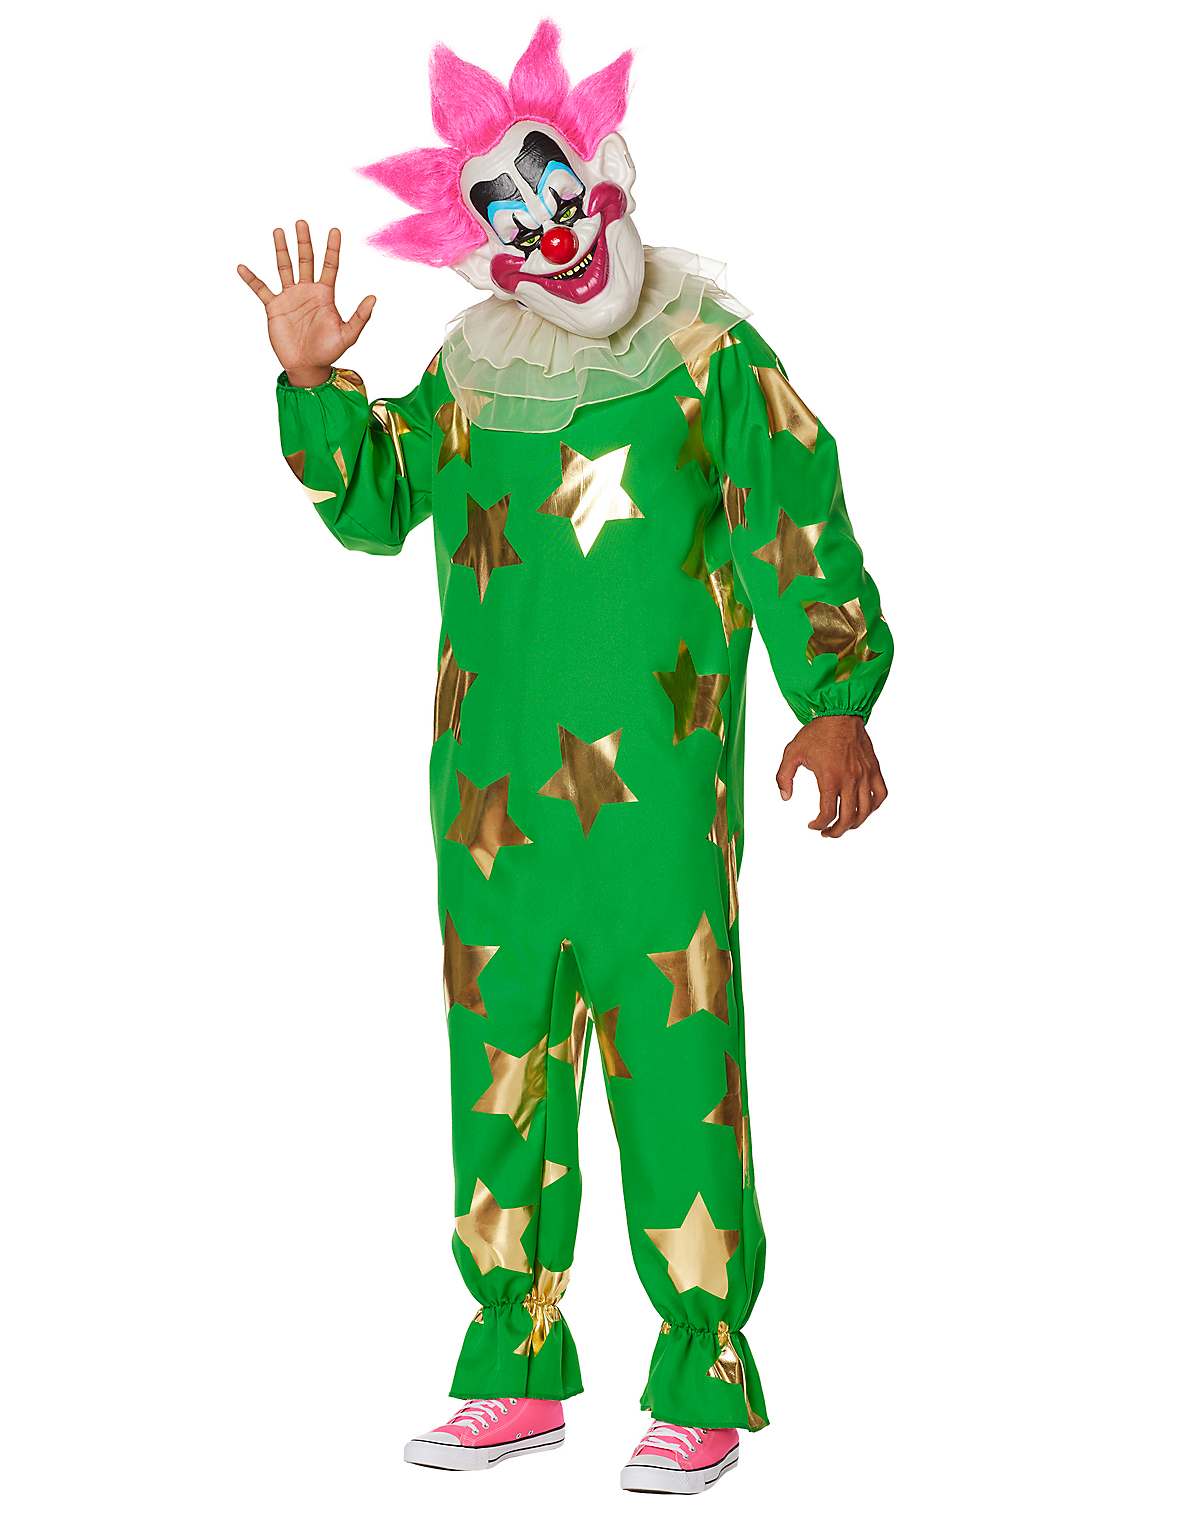 Killer Klowns from Outer Space Costumes, Accessories and Decorations ...